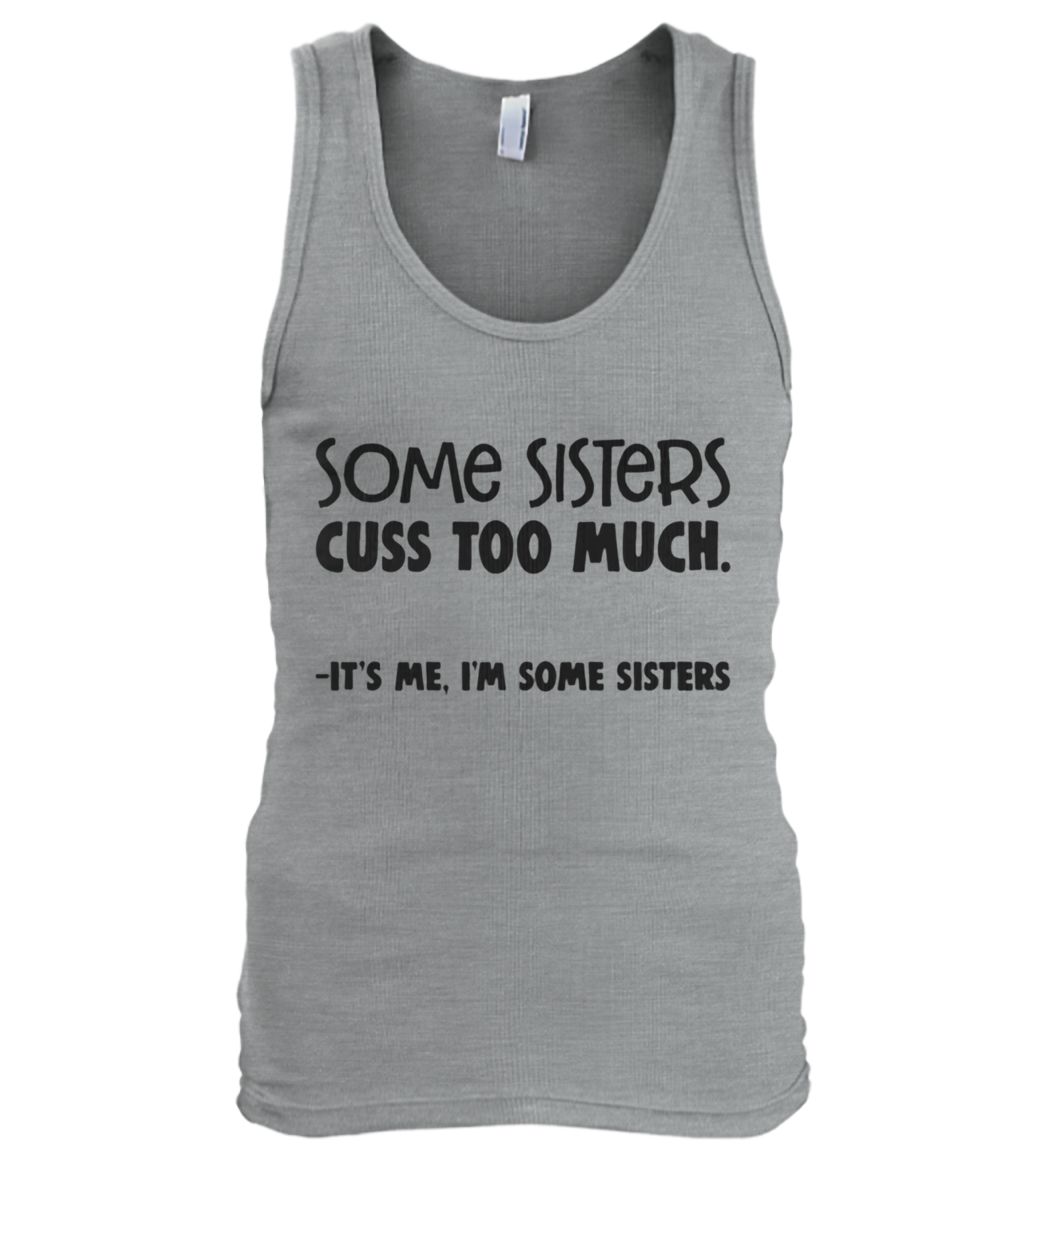 Some sisters cuss too much it's me I'm some sisters men's tank top